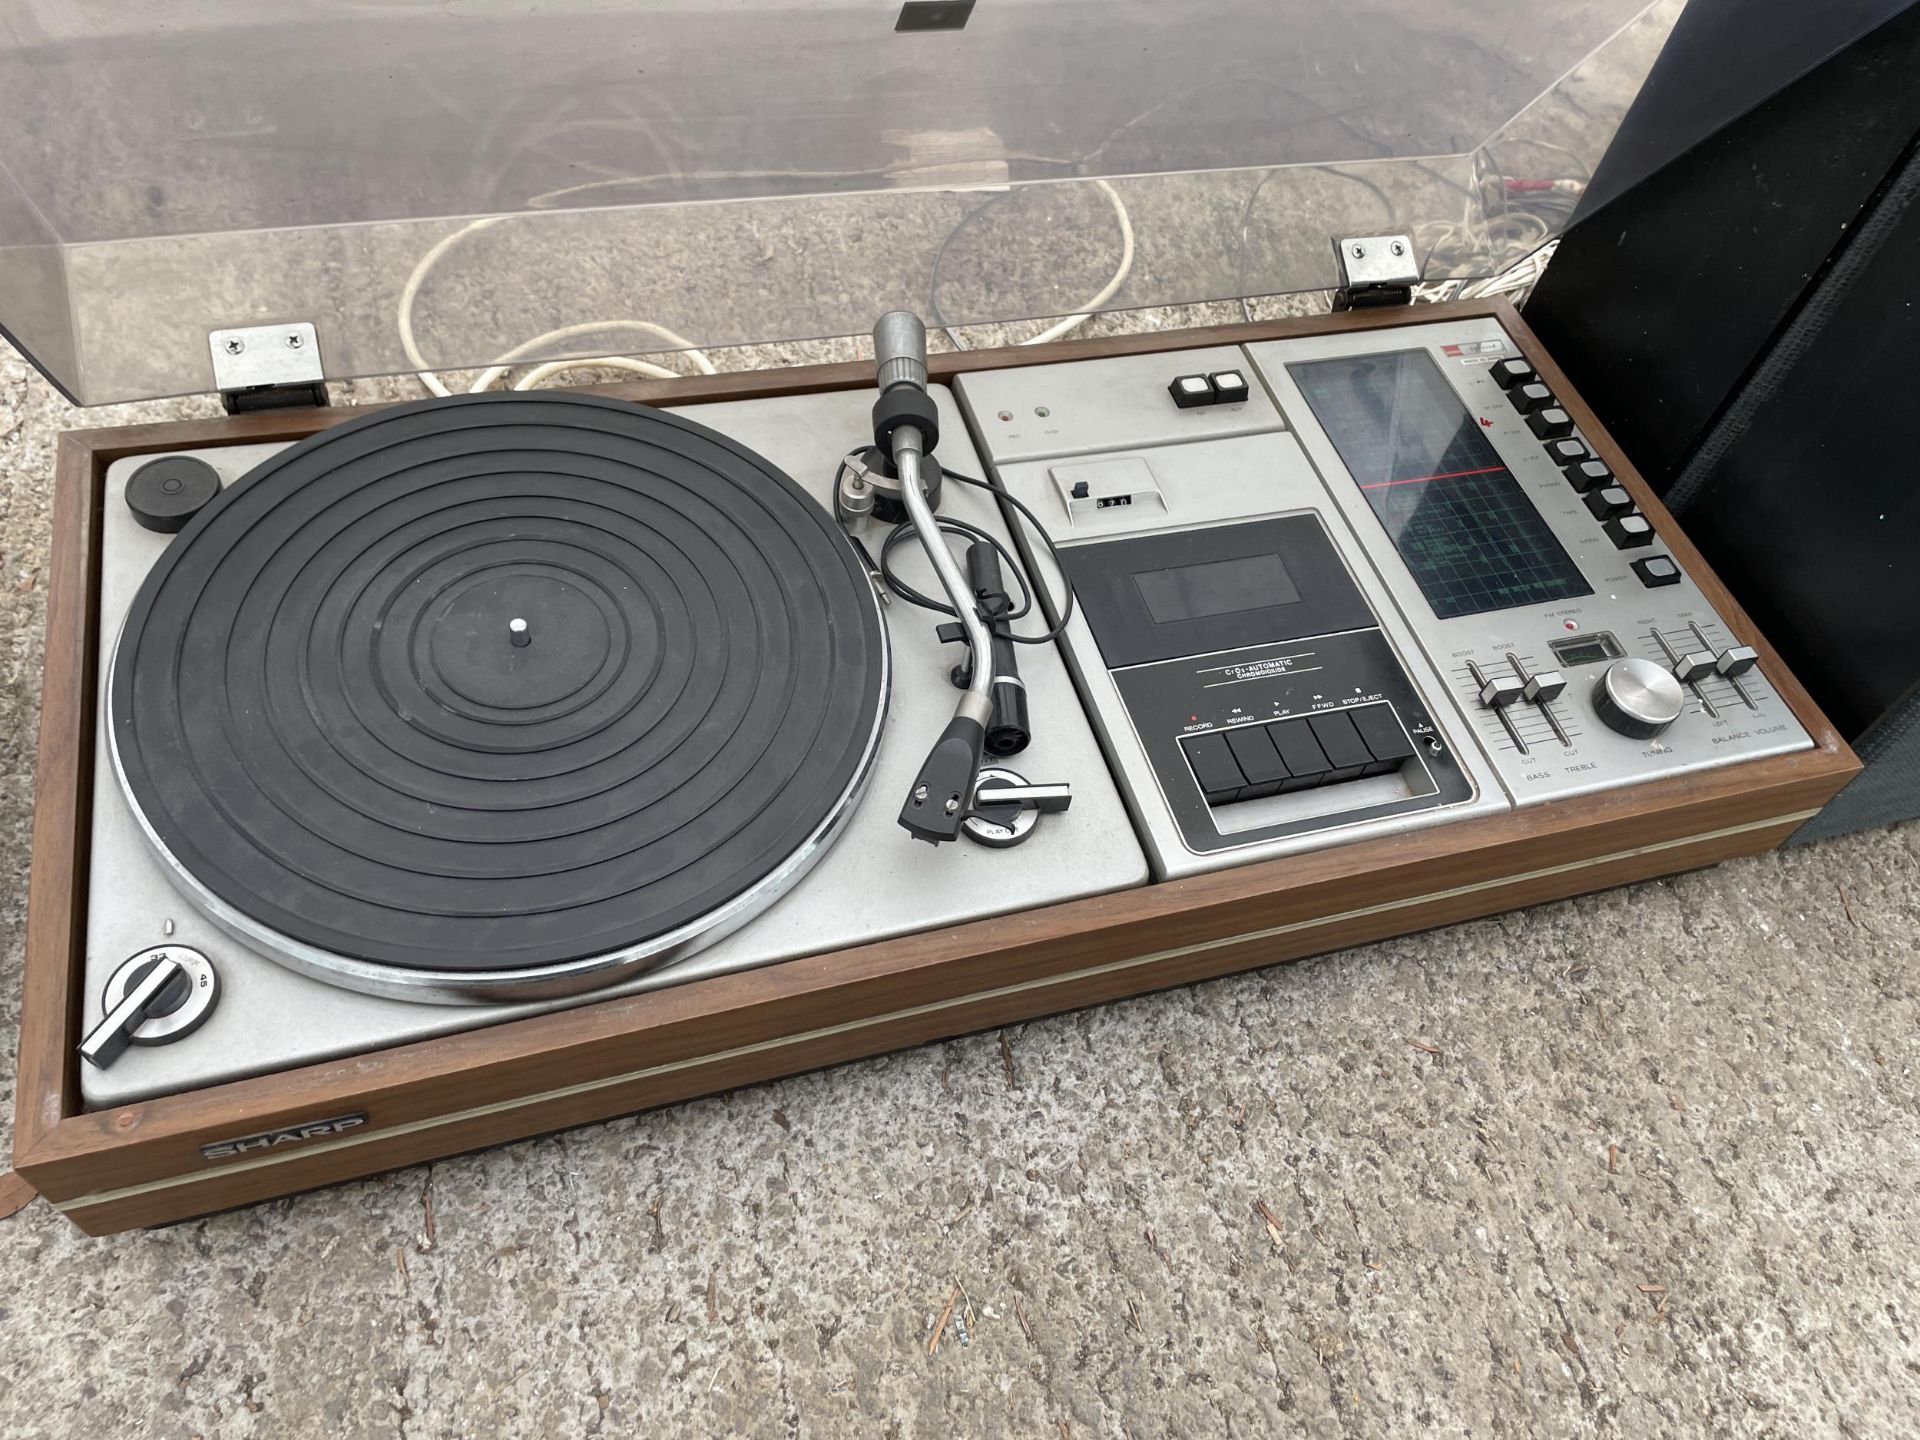 A SHARP RECORD PLAYER AND A PAIR OF SHARP SPEAKERS - Image 2 of 4